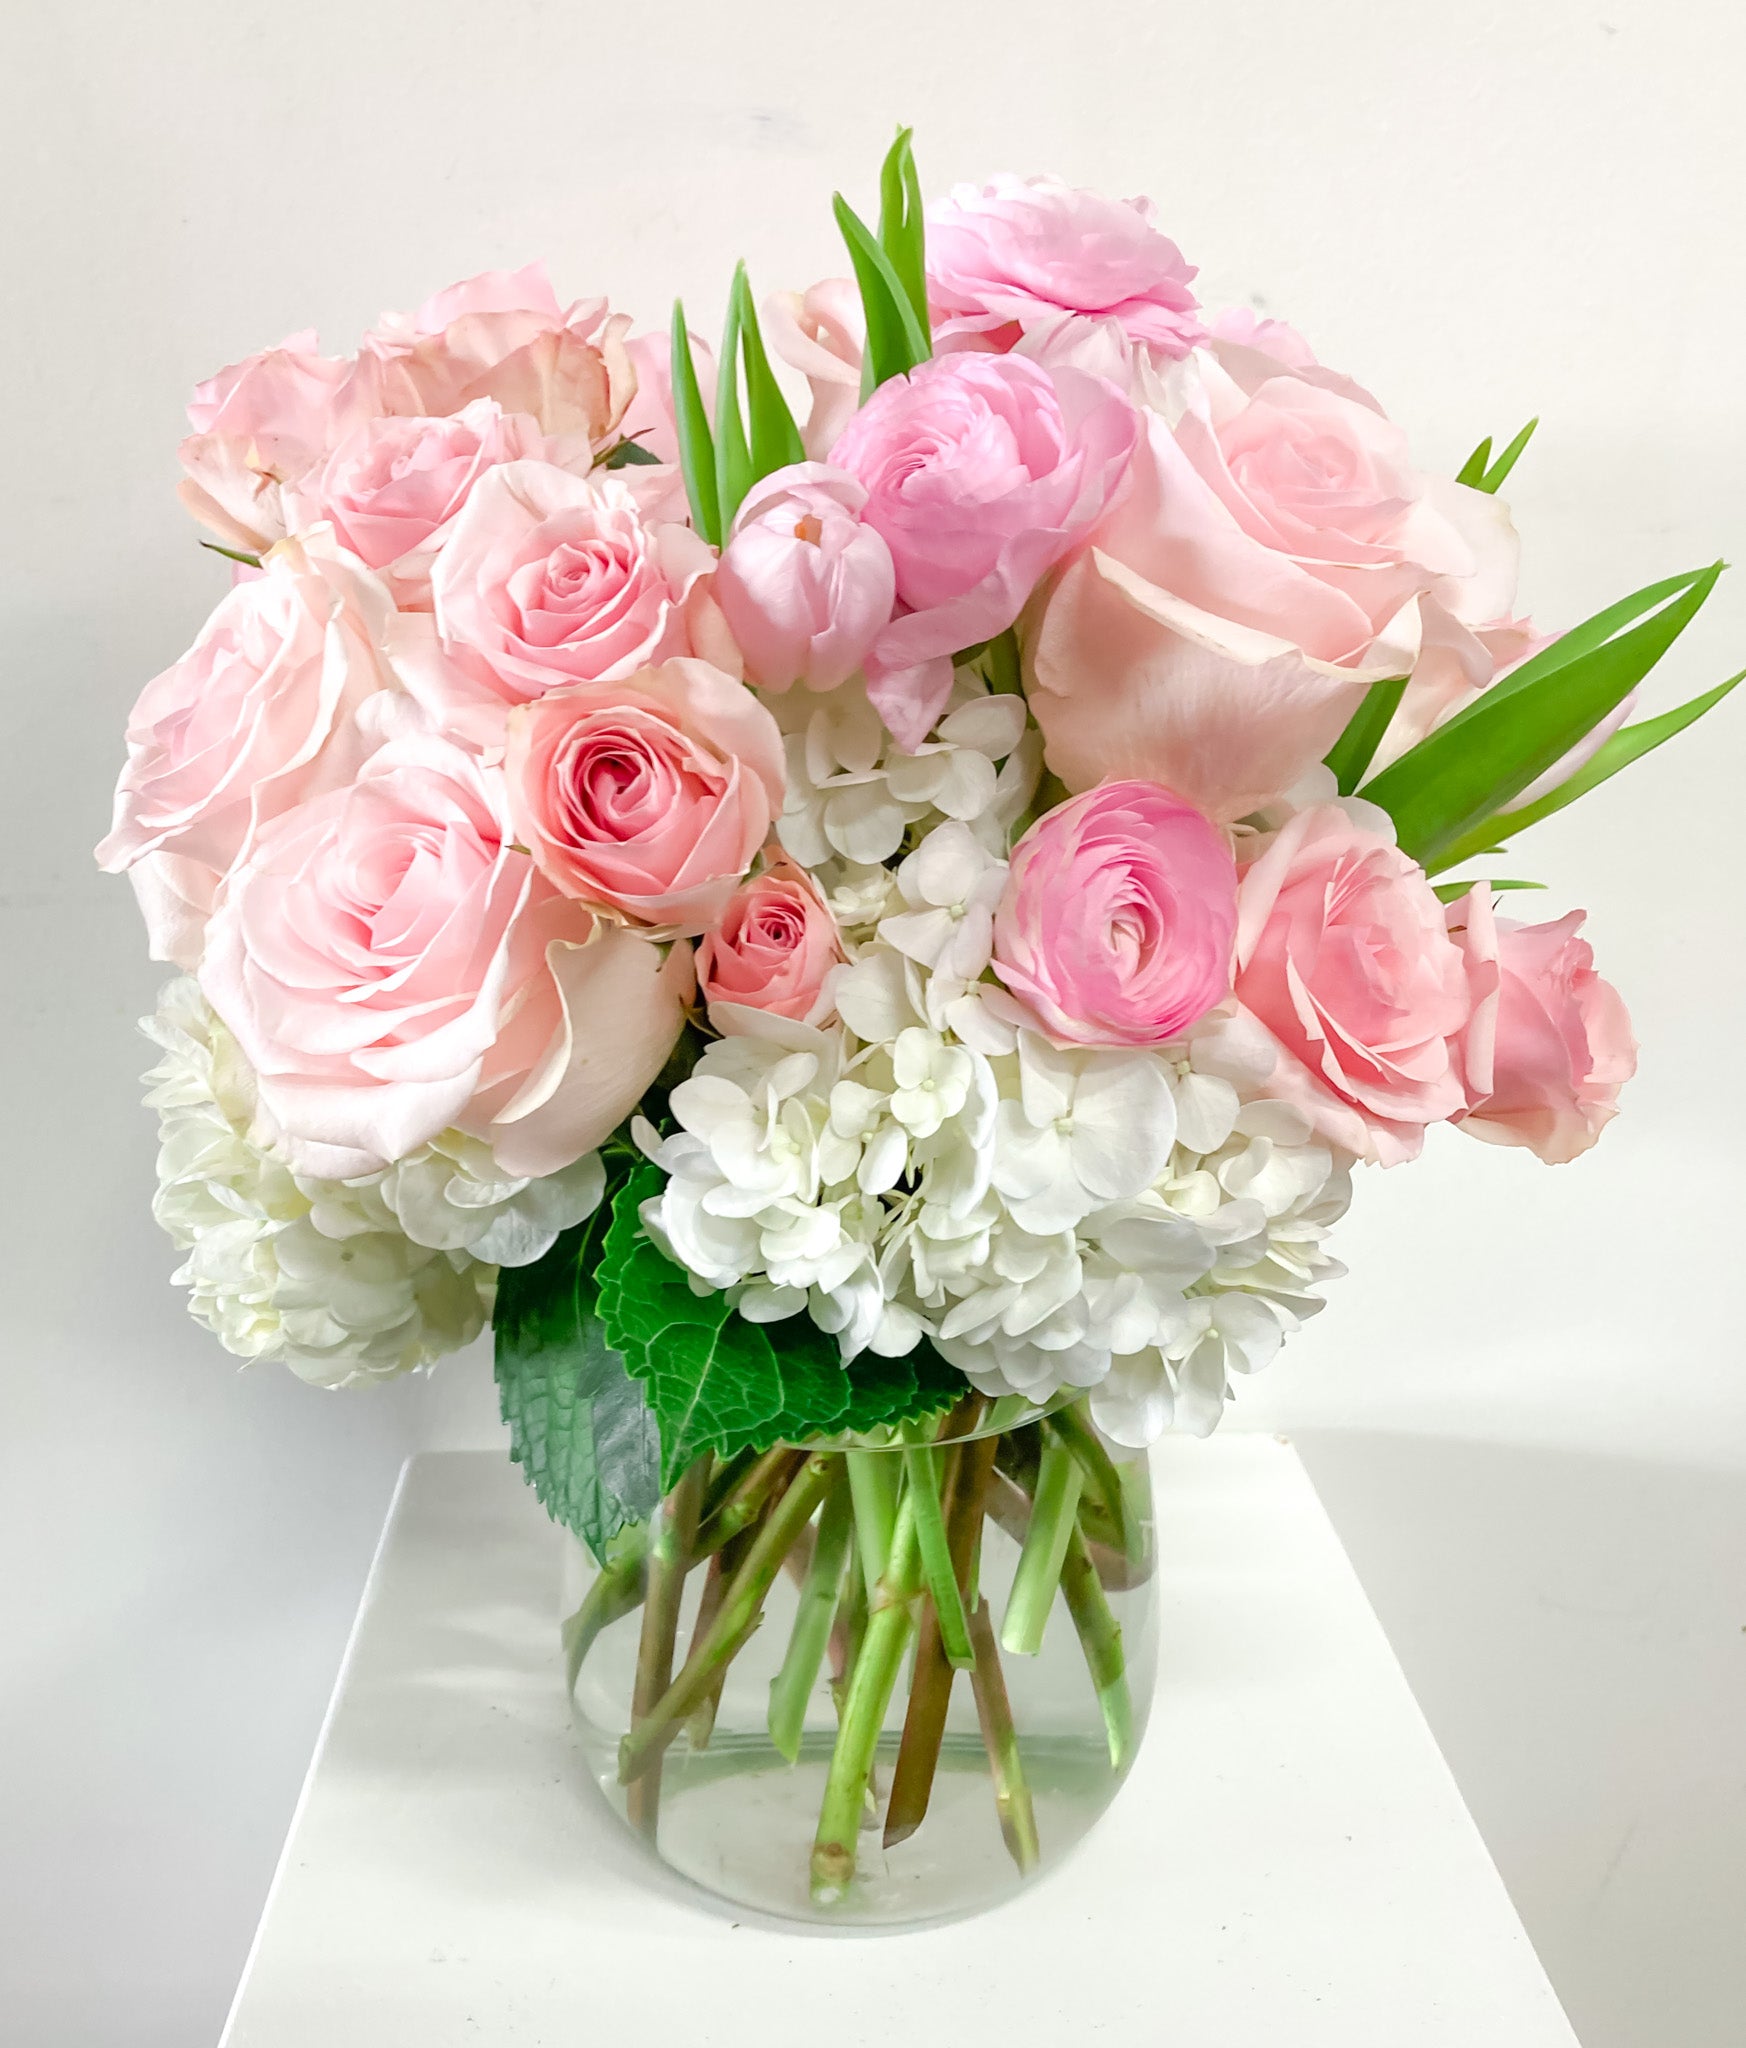 Local Flower Delivery – Lizzie Bee's Flower Shoppe